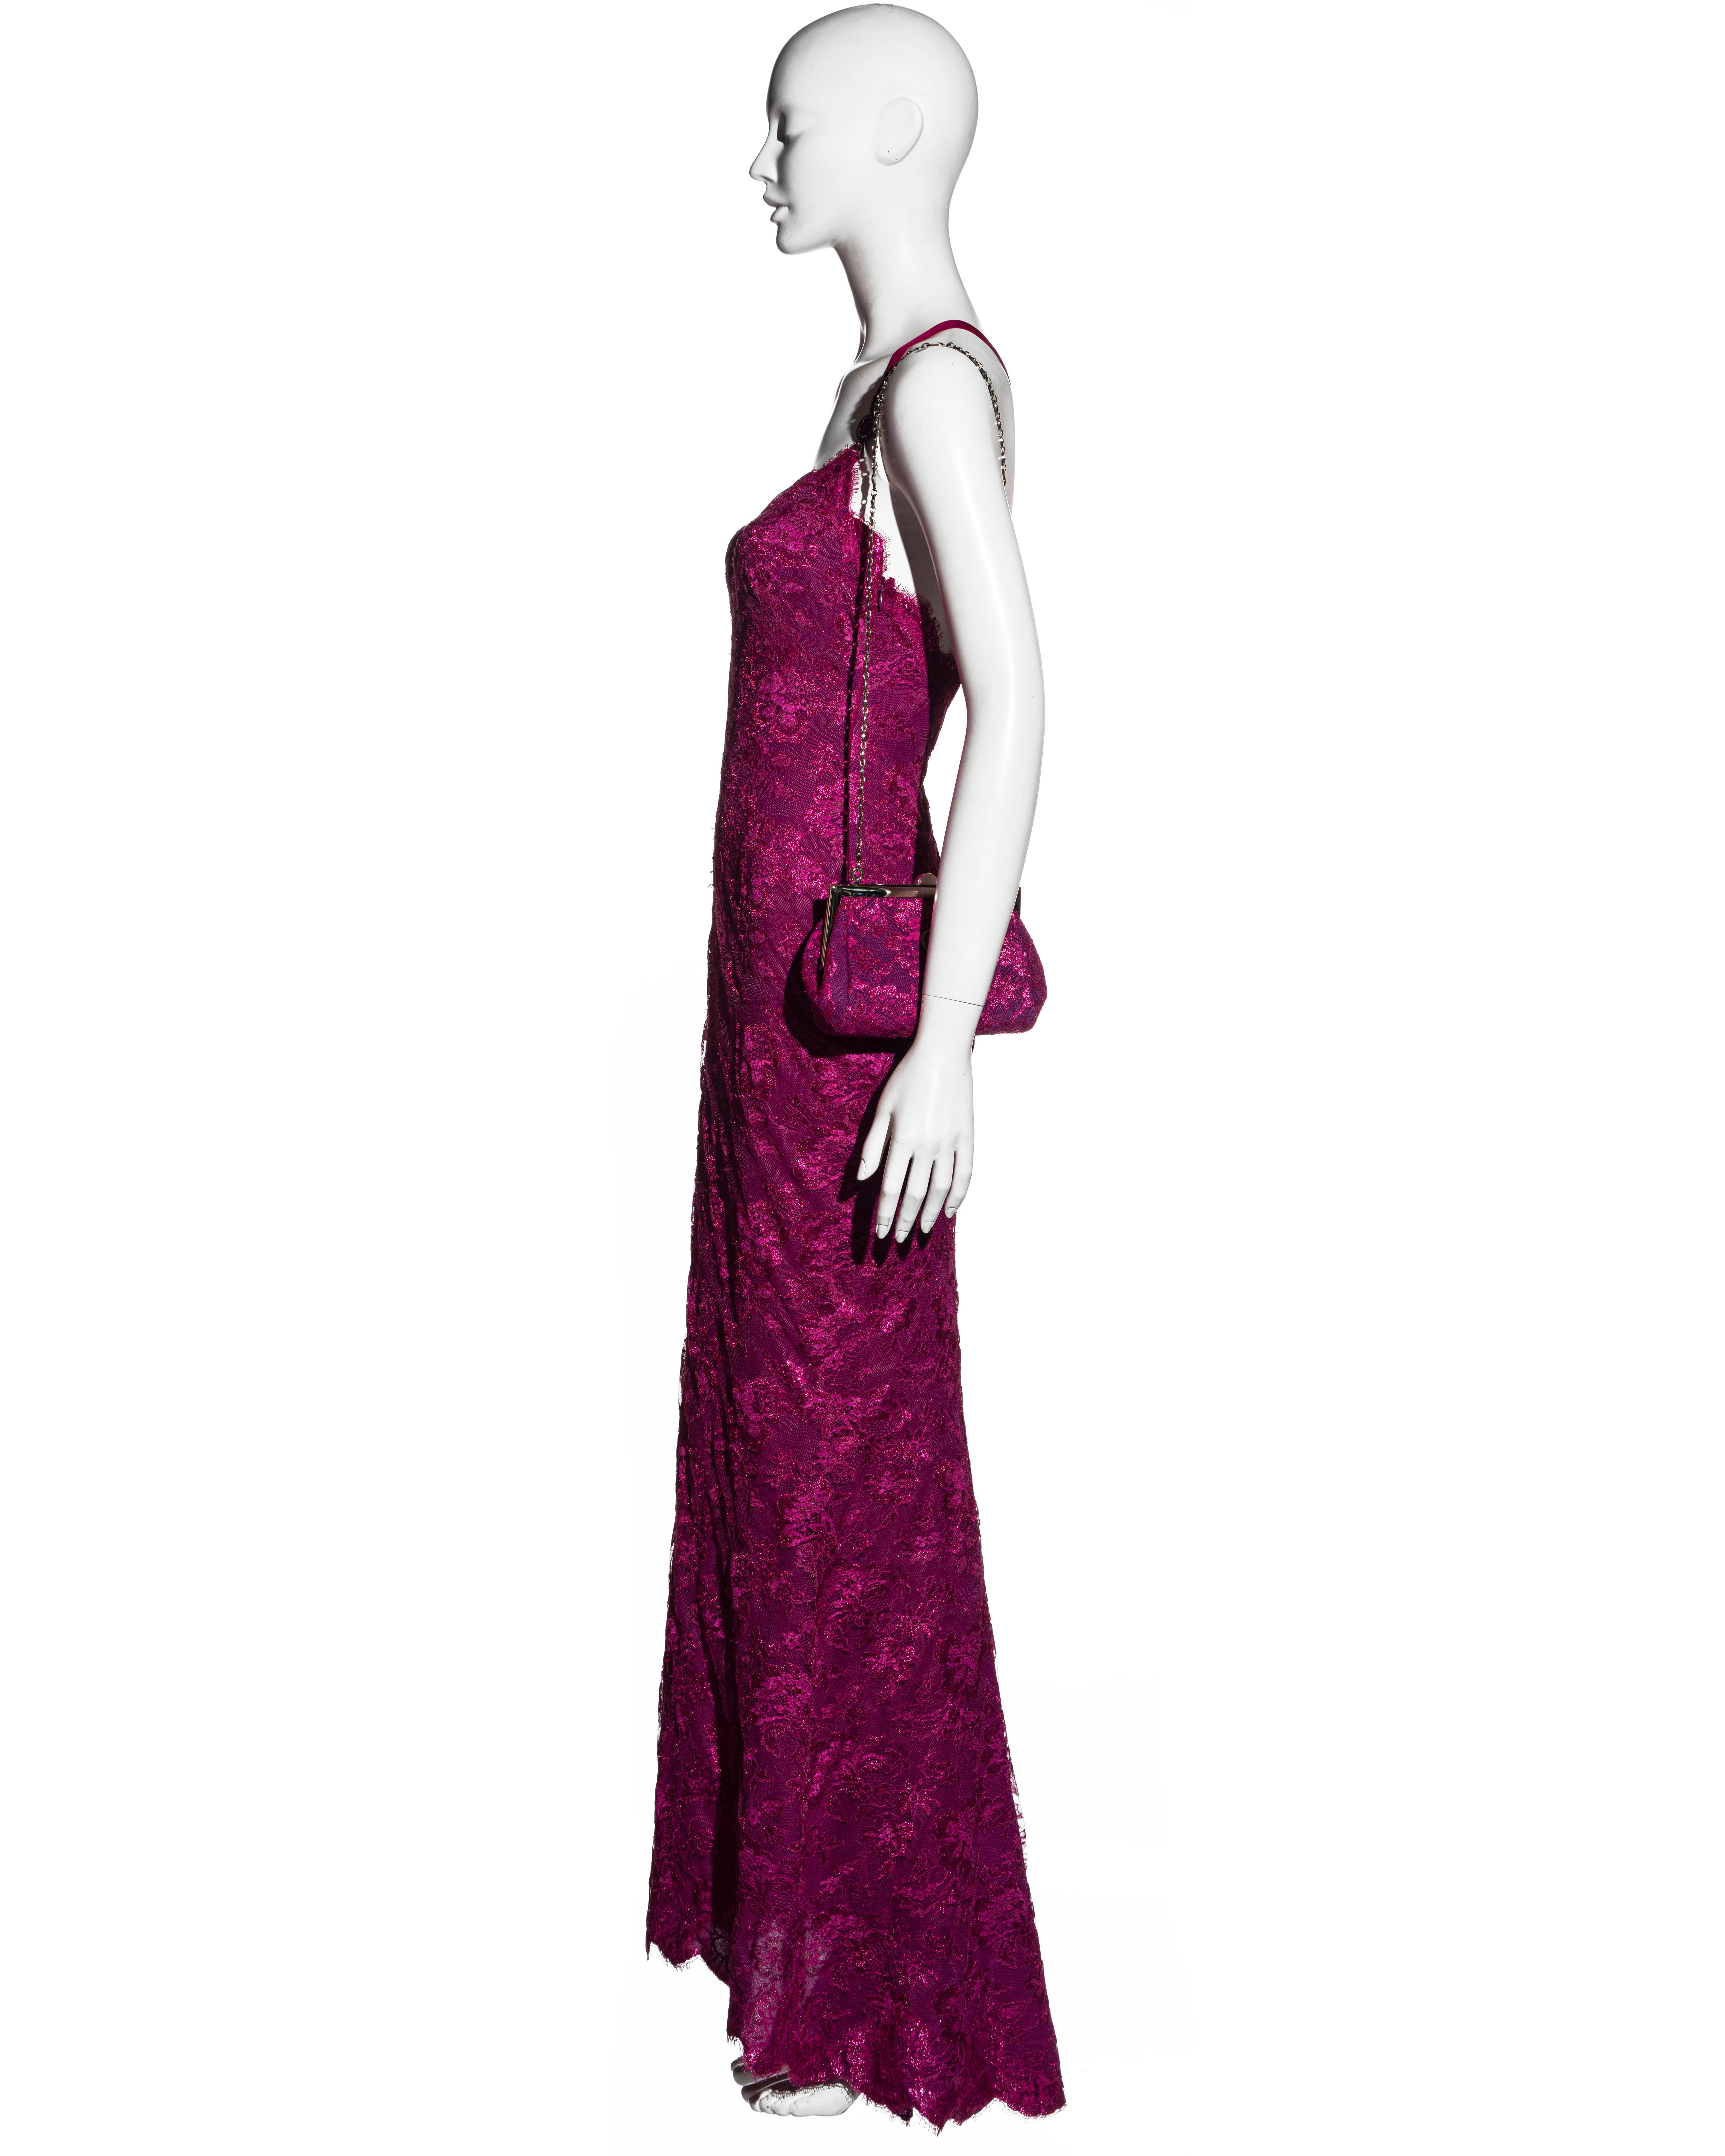 Atelier Versace Haute Couture magenta pink lace evening dress and purse, ss 1996 1